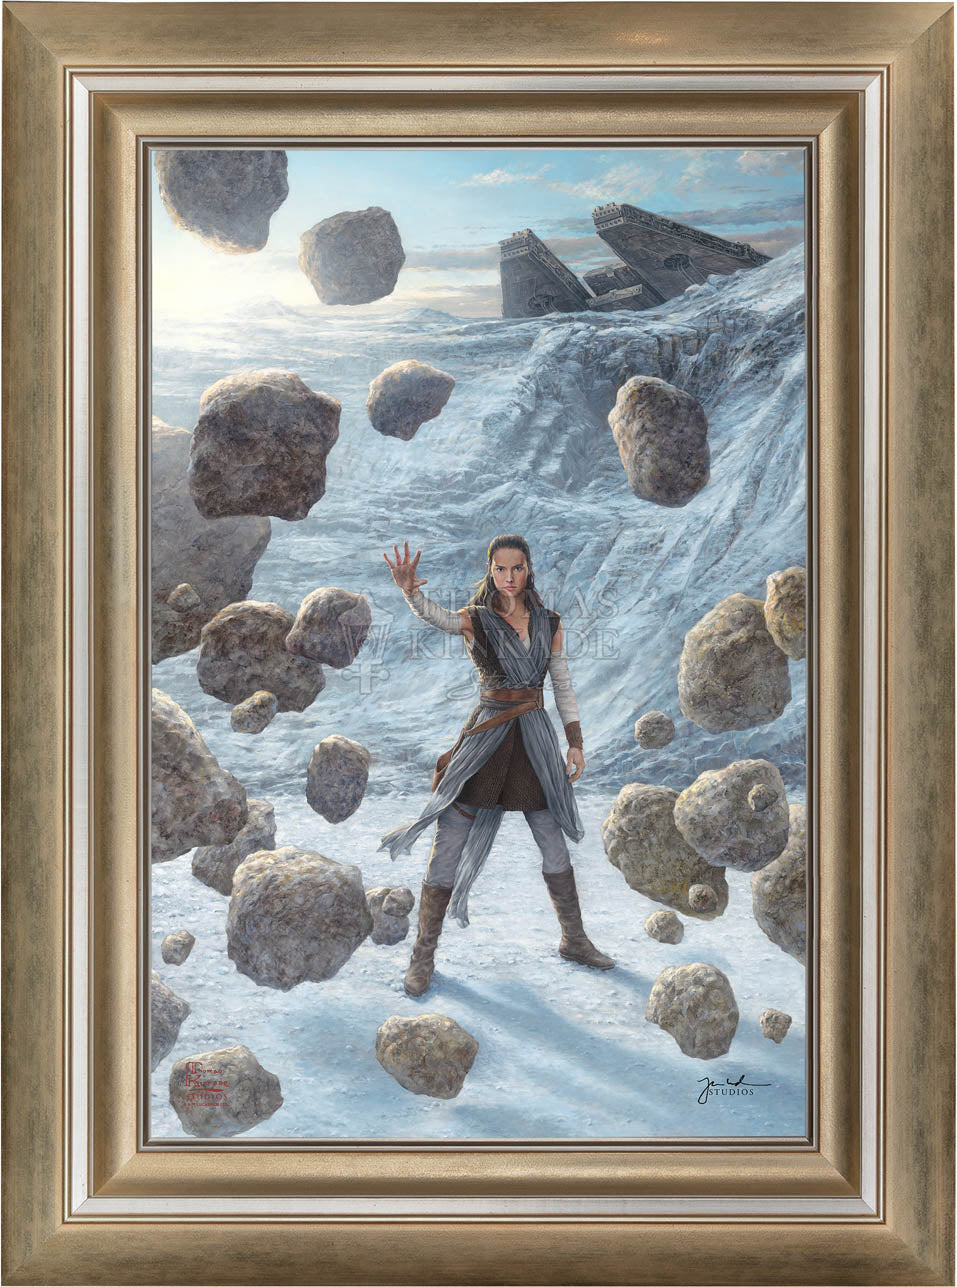 Rey uses the Force to lift the boulders - Frame- Brushed Gold